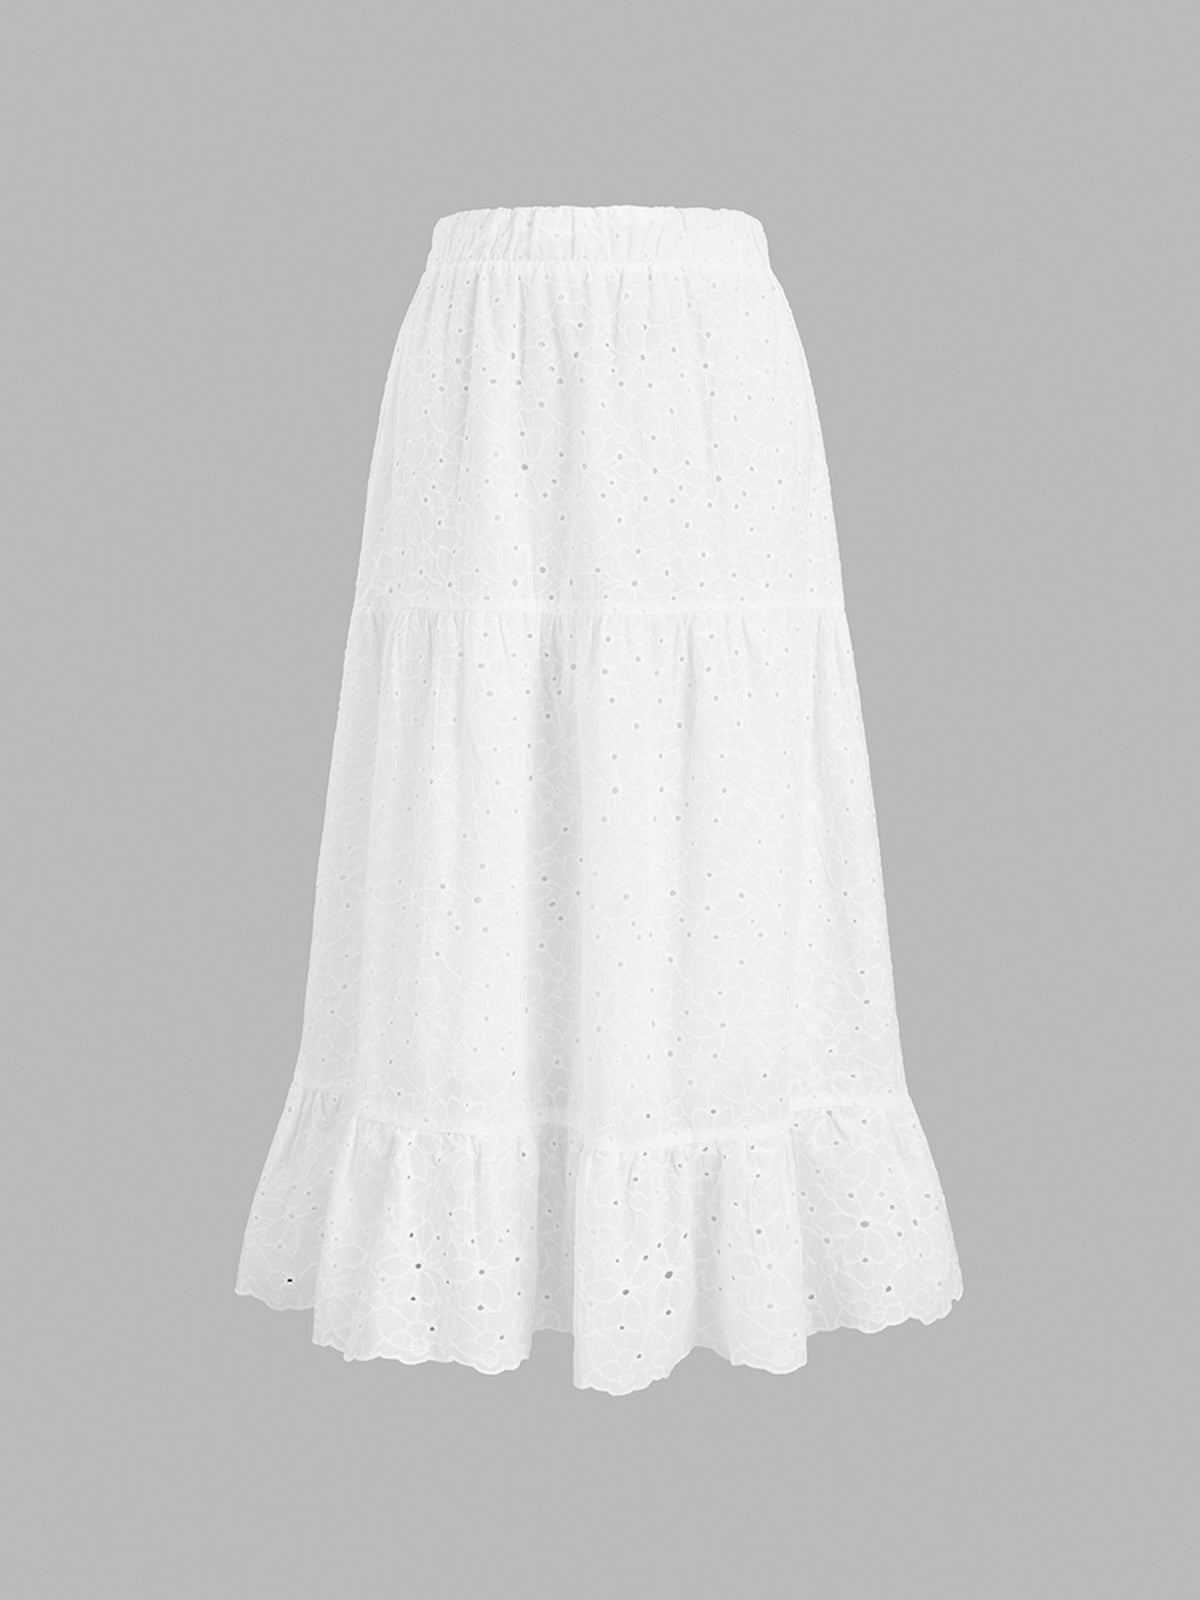 Embroidered Floral Eyelet Maxi Skirt